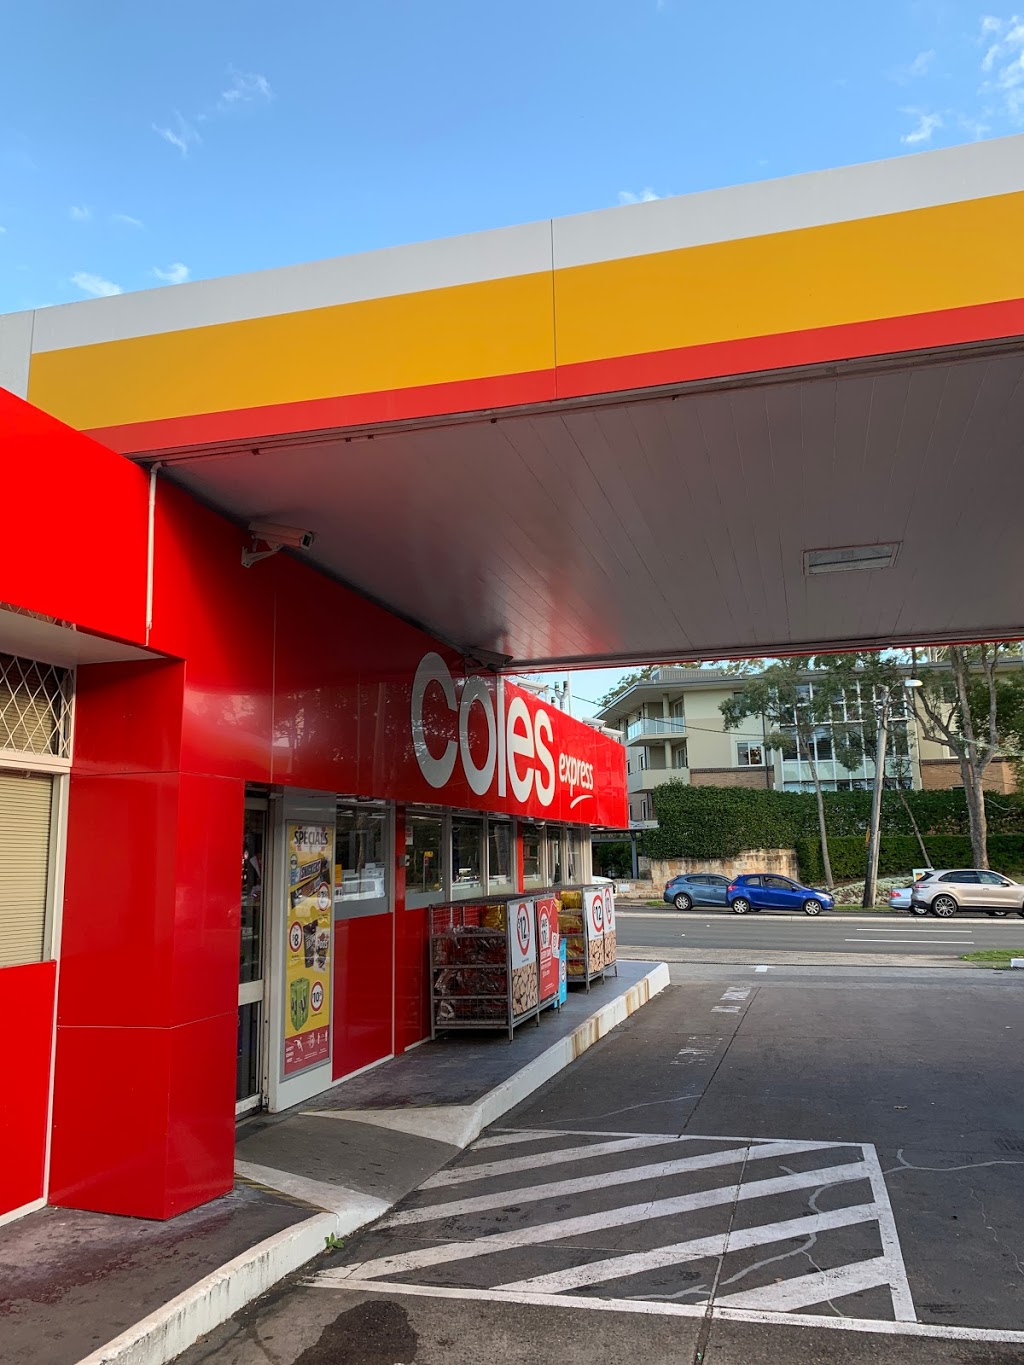 Shell Coles Express Wahroonga | 1601 Pacific Hwy &, Coonanbarra Rd, Wahroonga NSW 2076, Australia | Phone: (02) 9487 6866